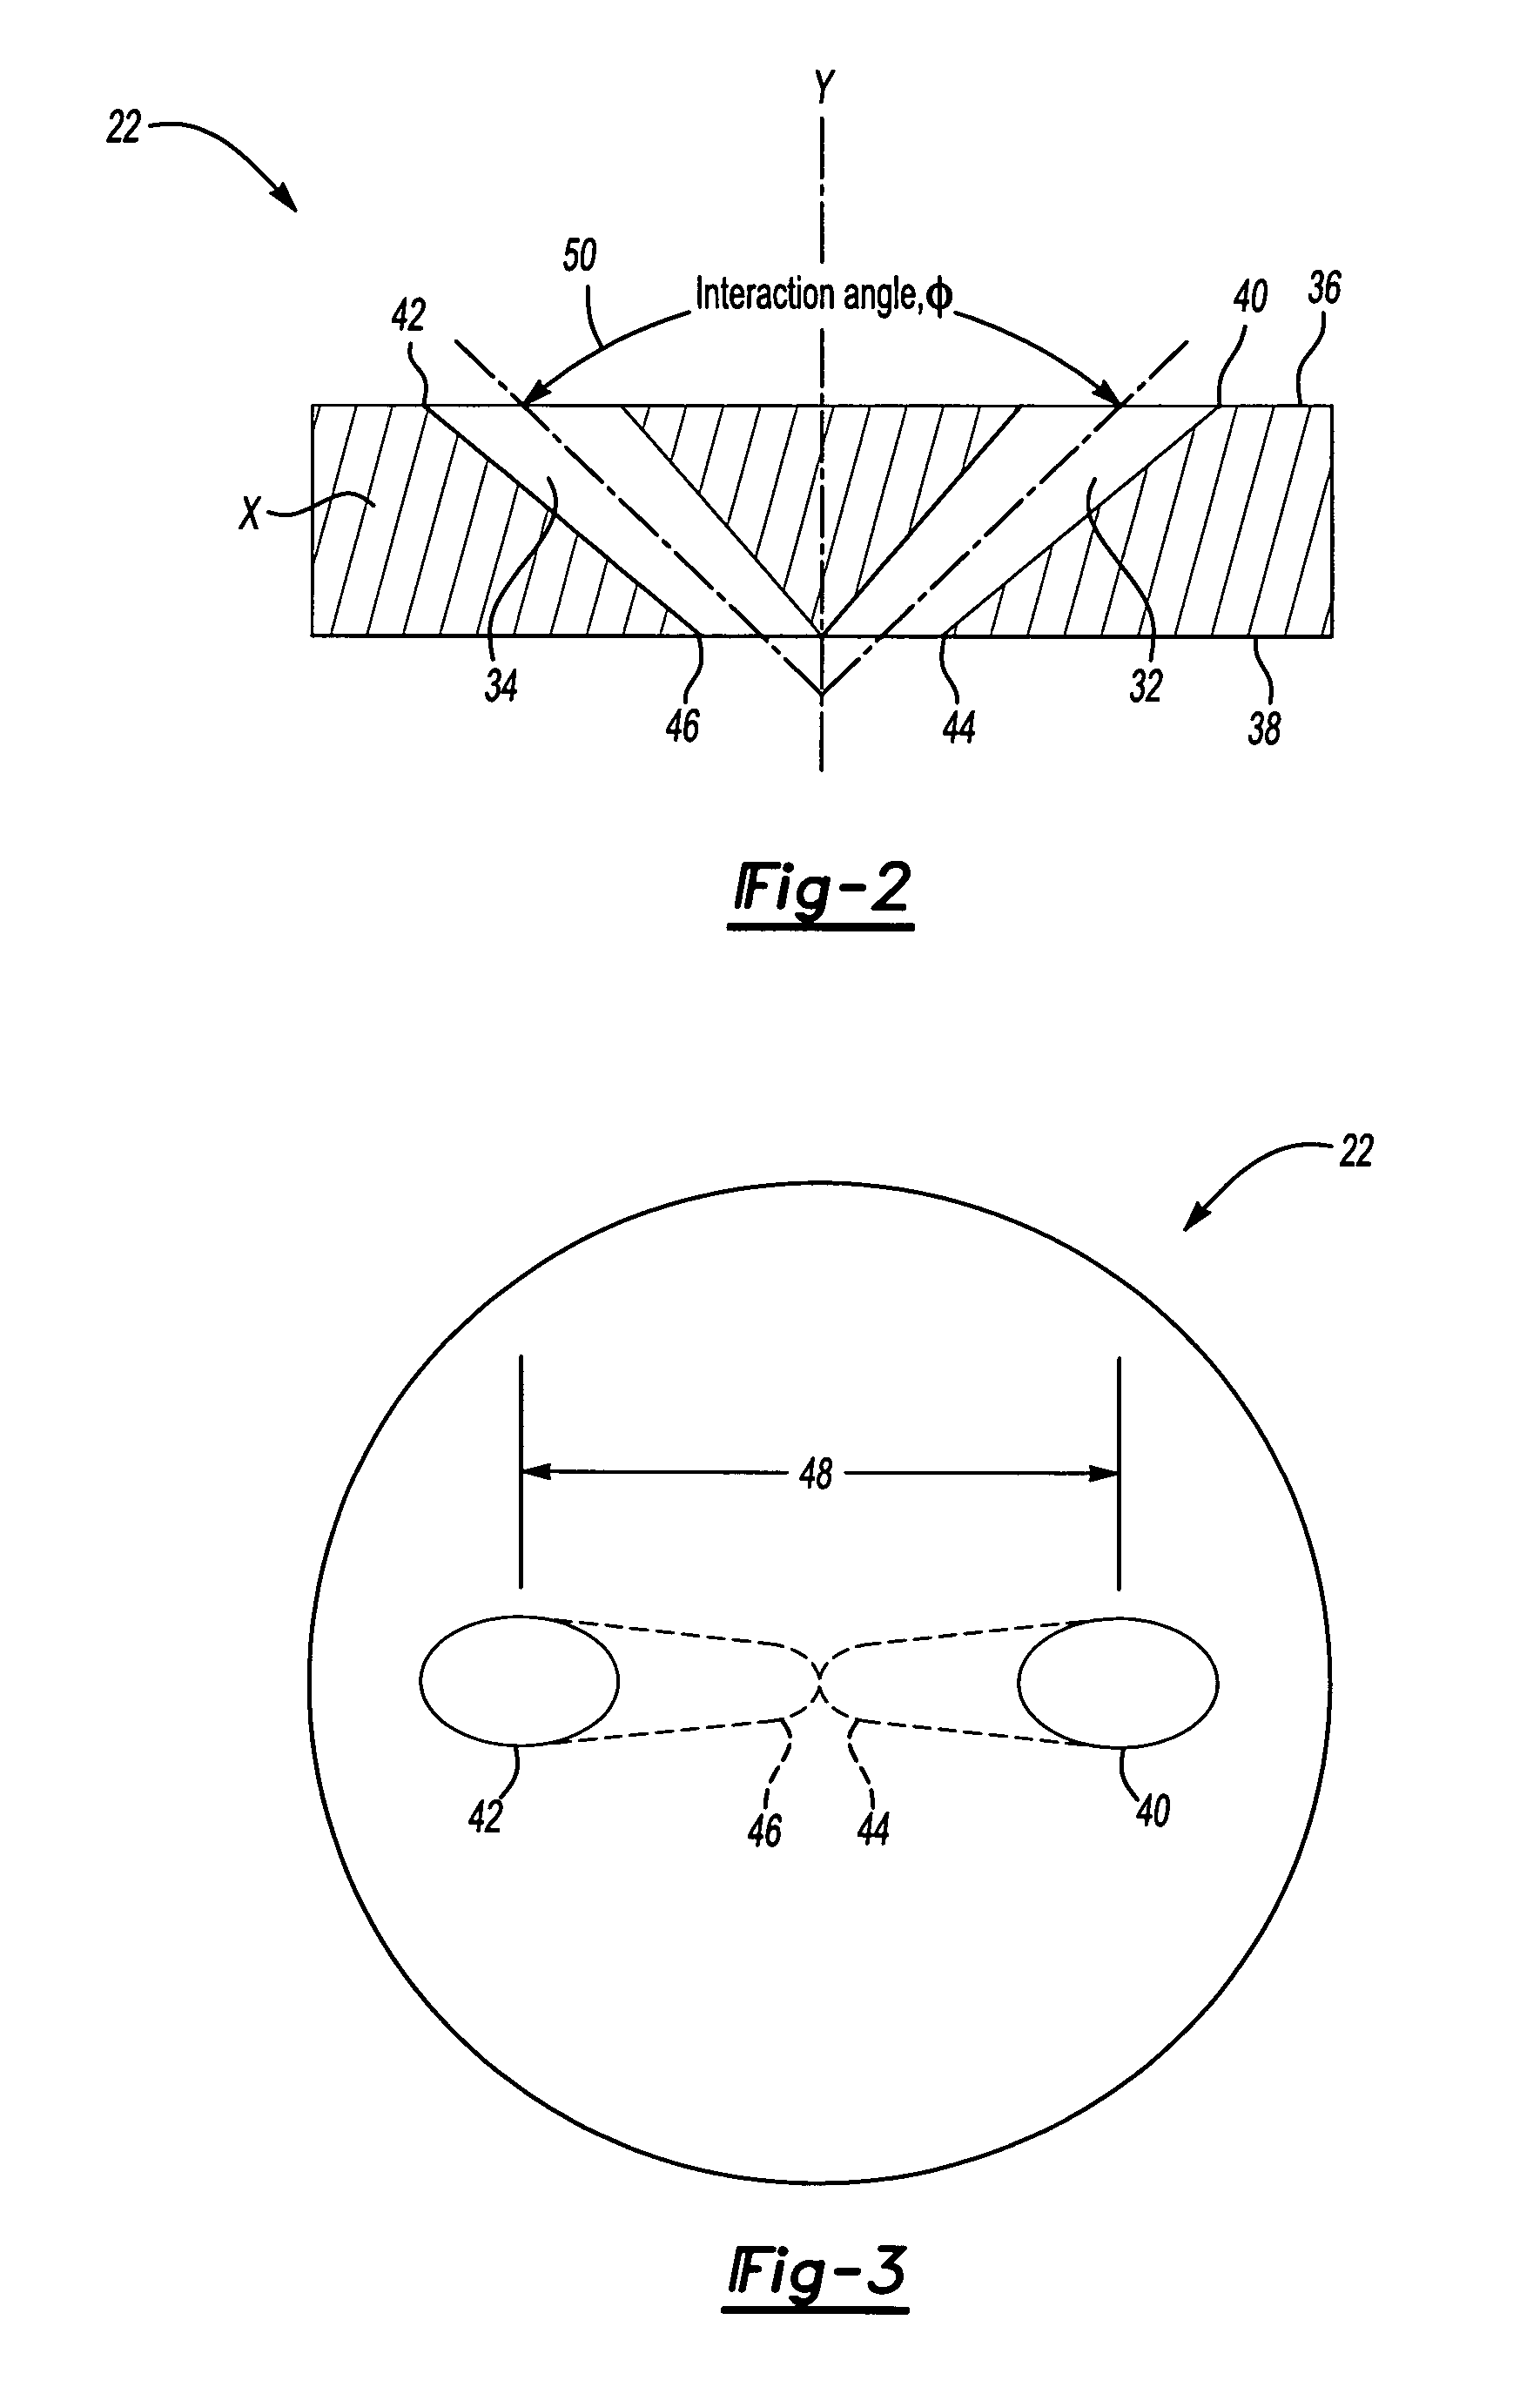 Orifice disc for fuel injector